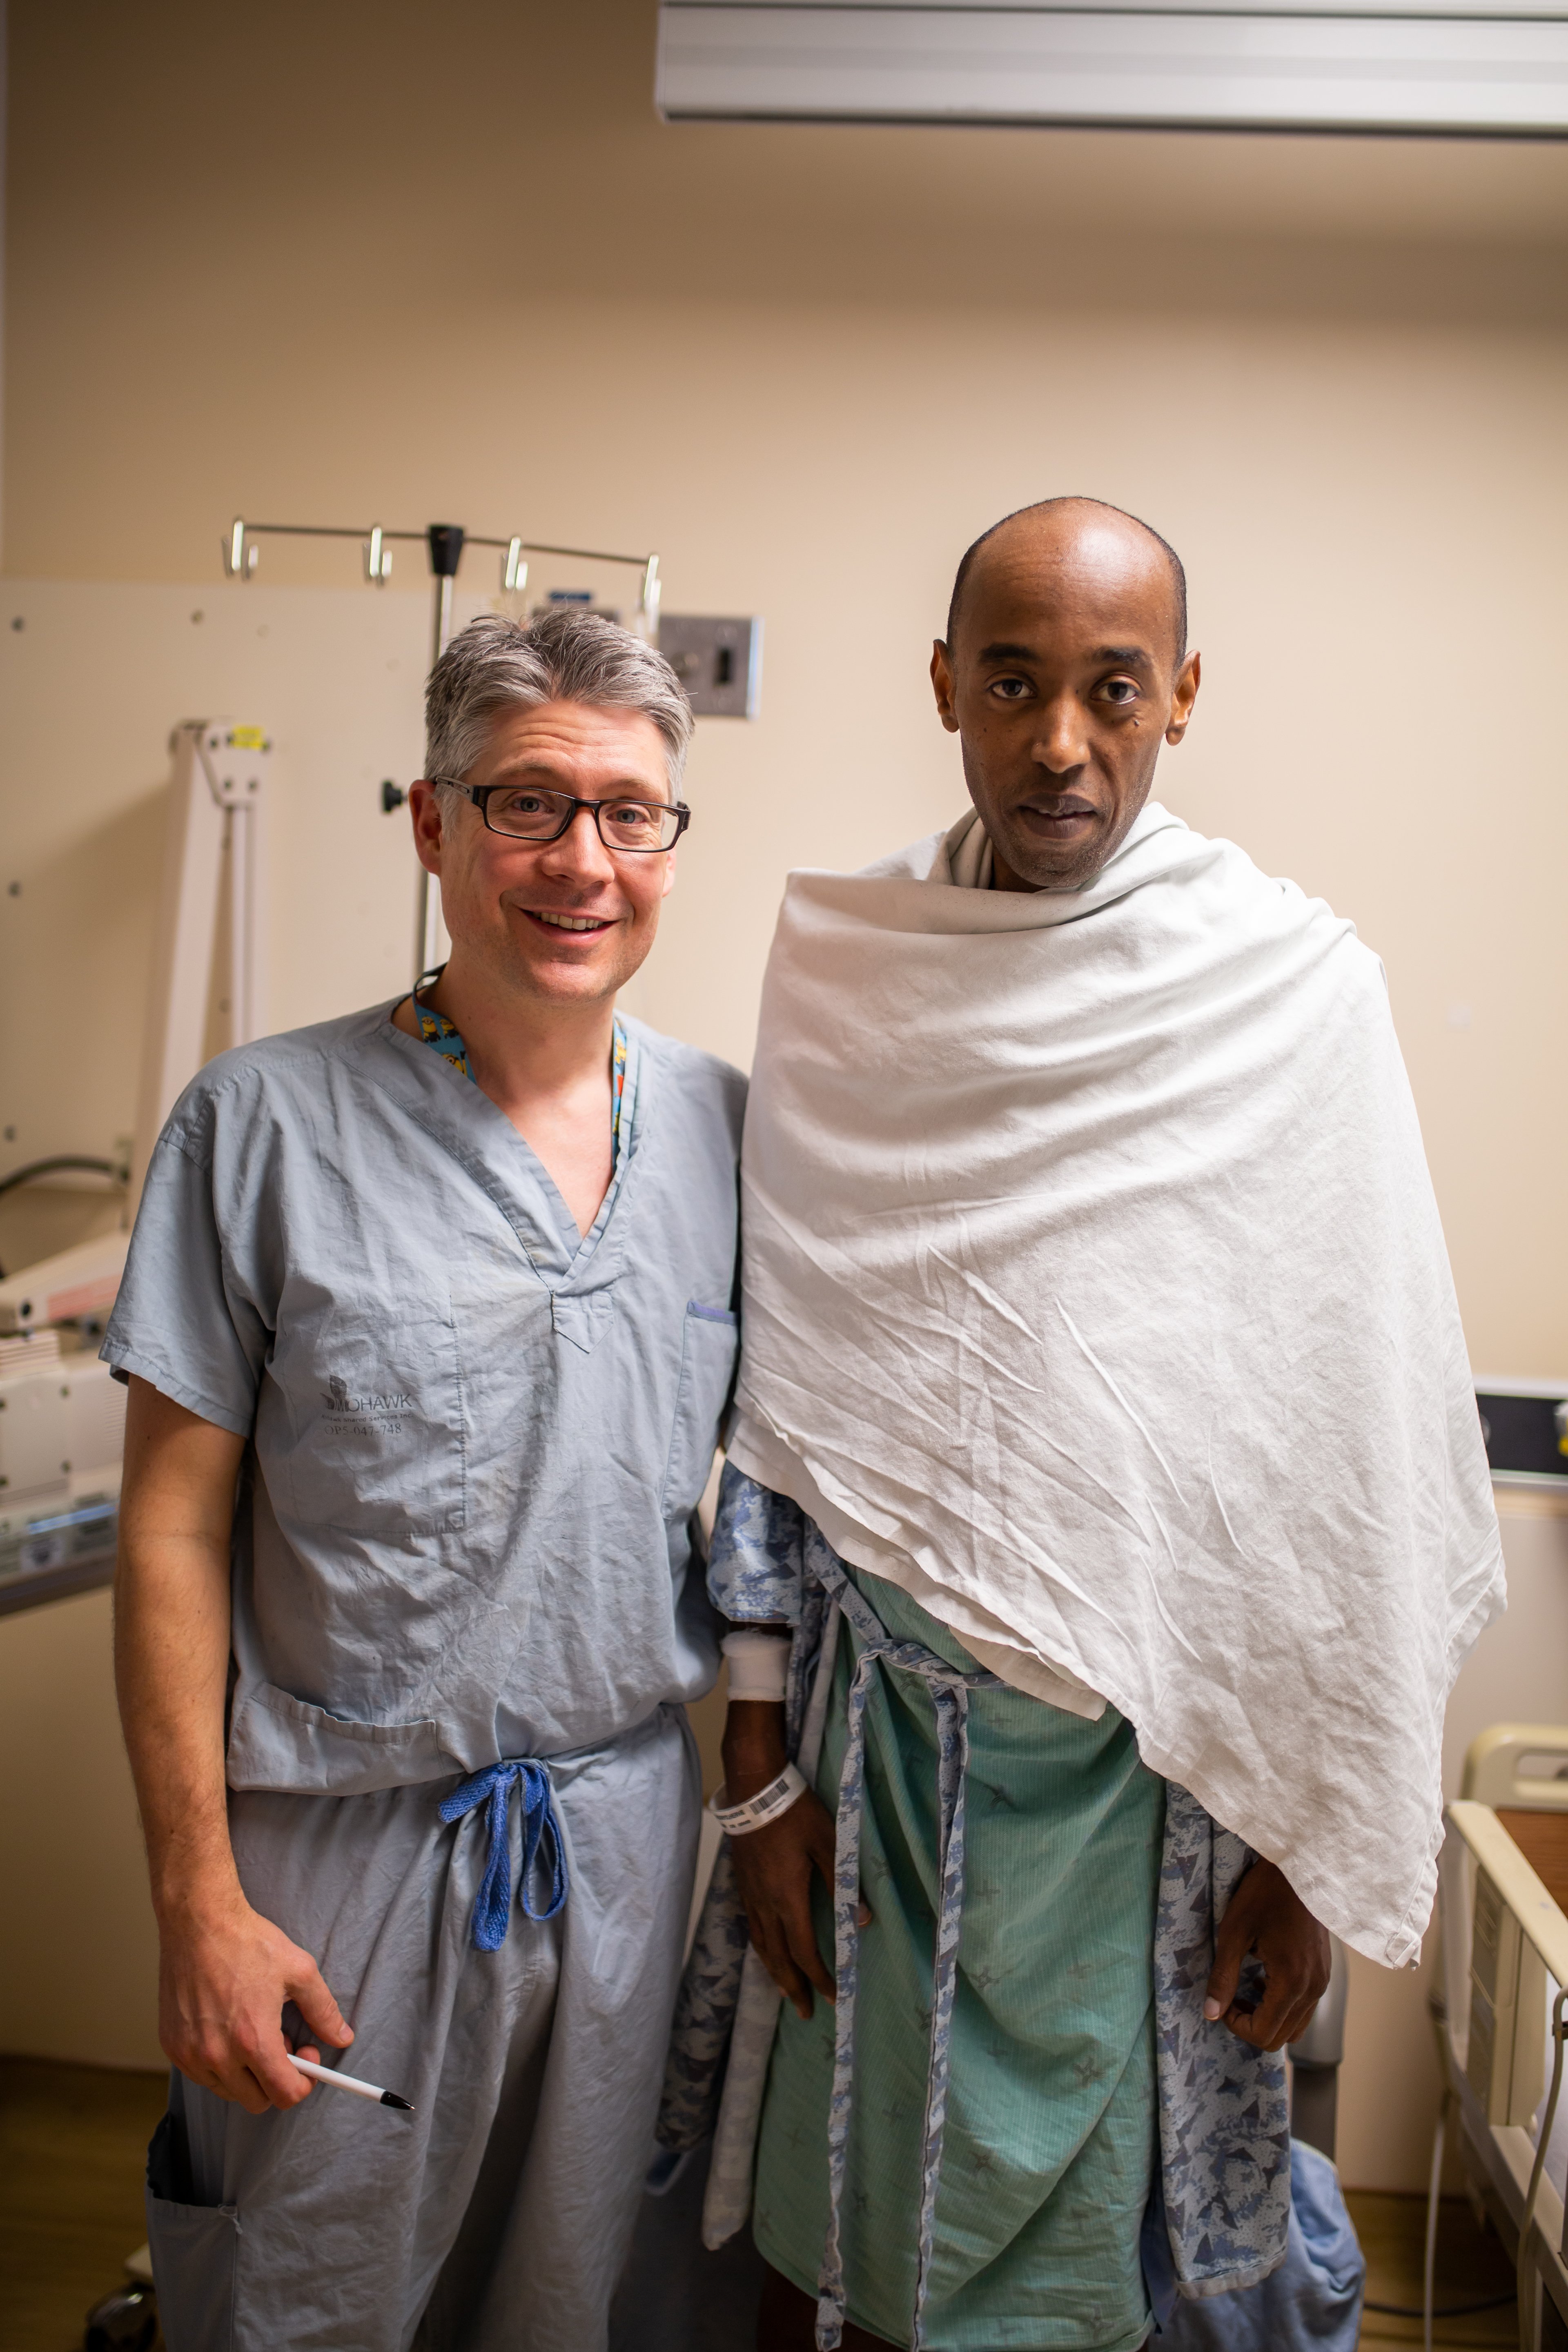 Dr. Whitlock and Herve stand together in the hospital